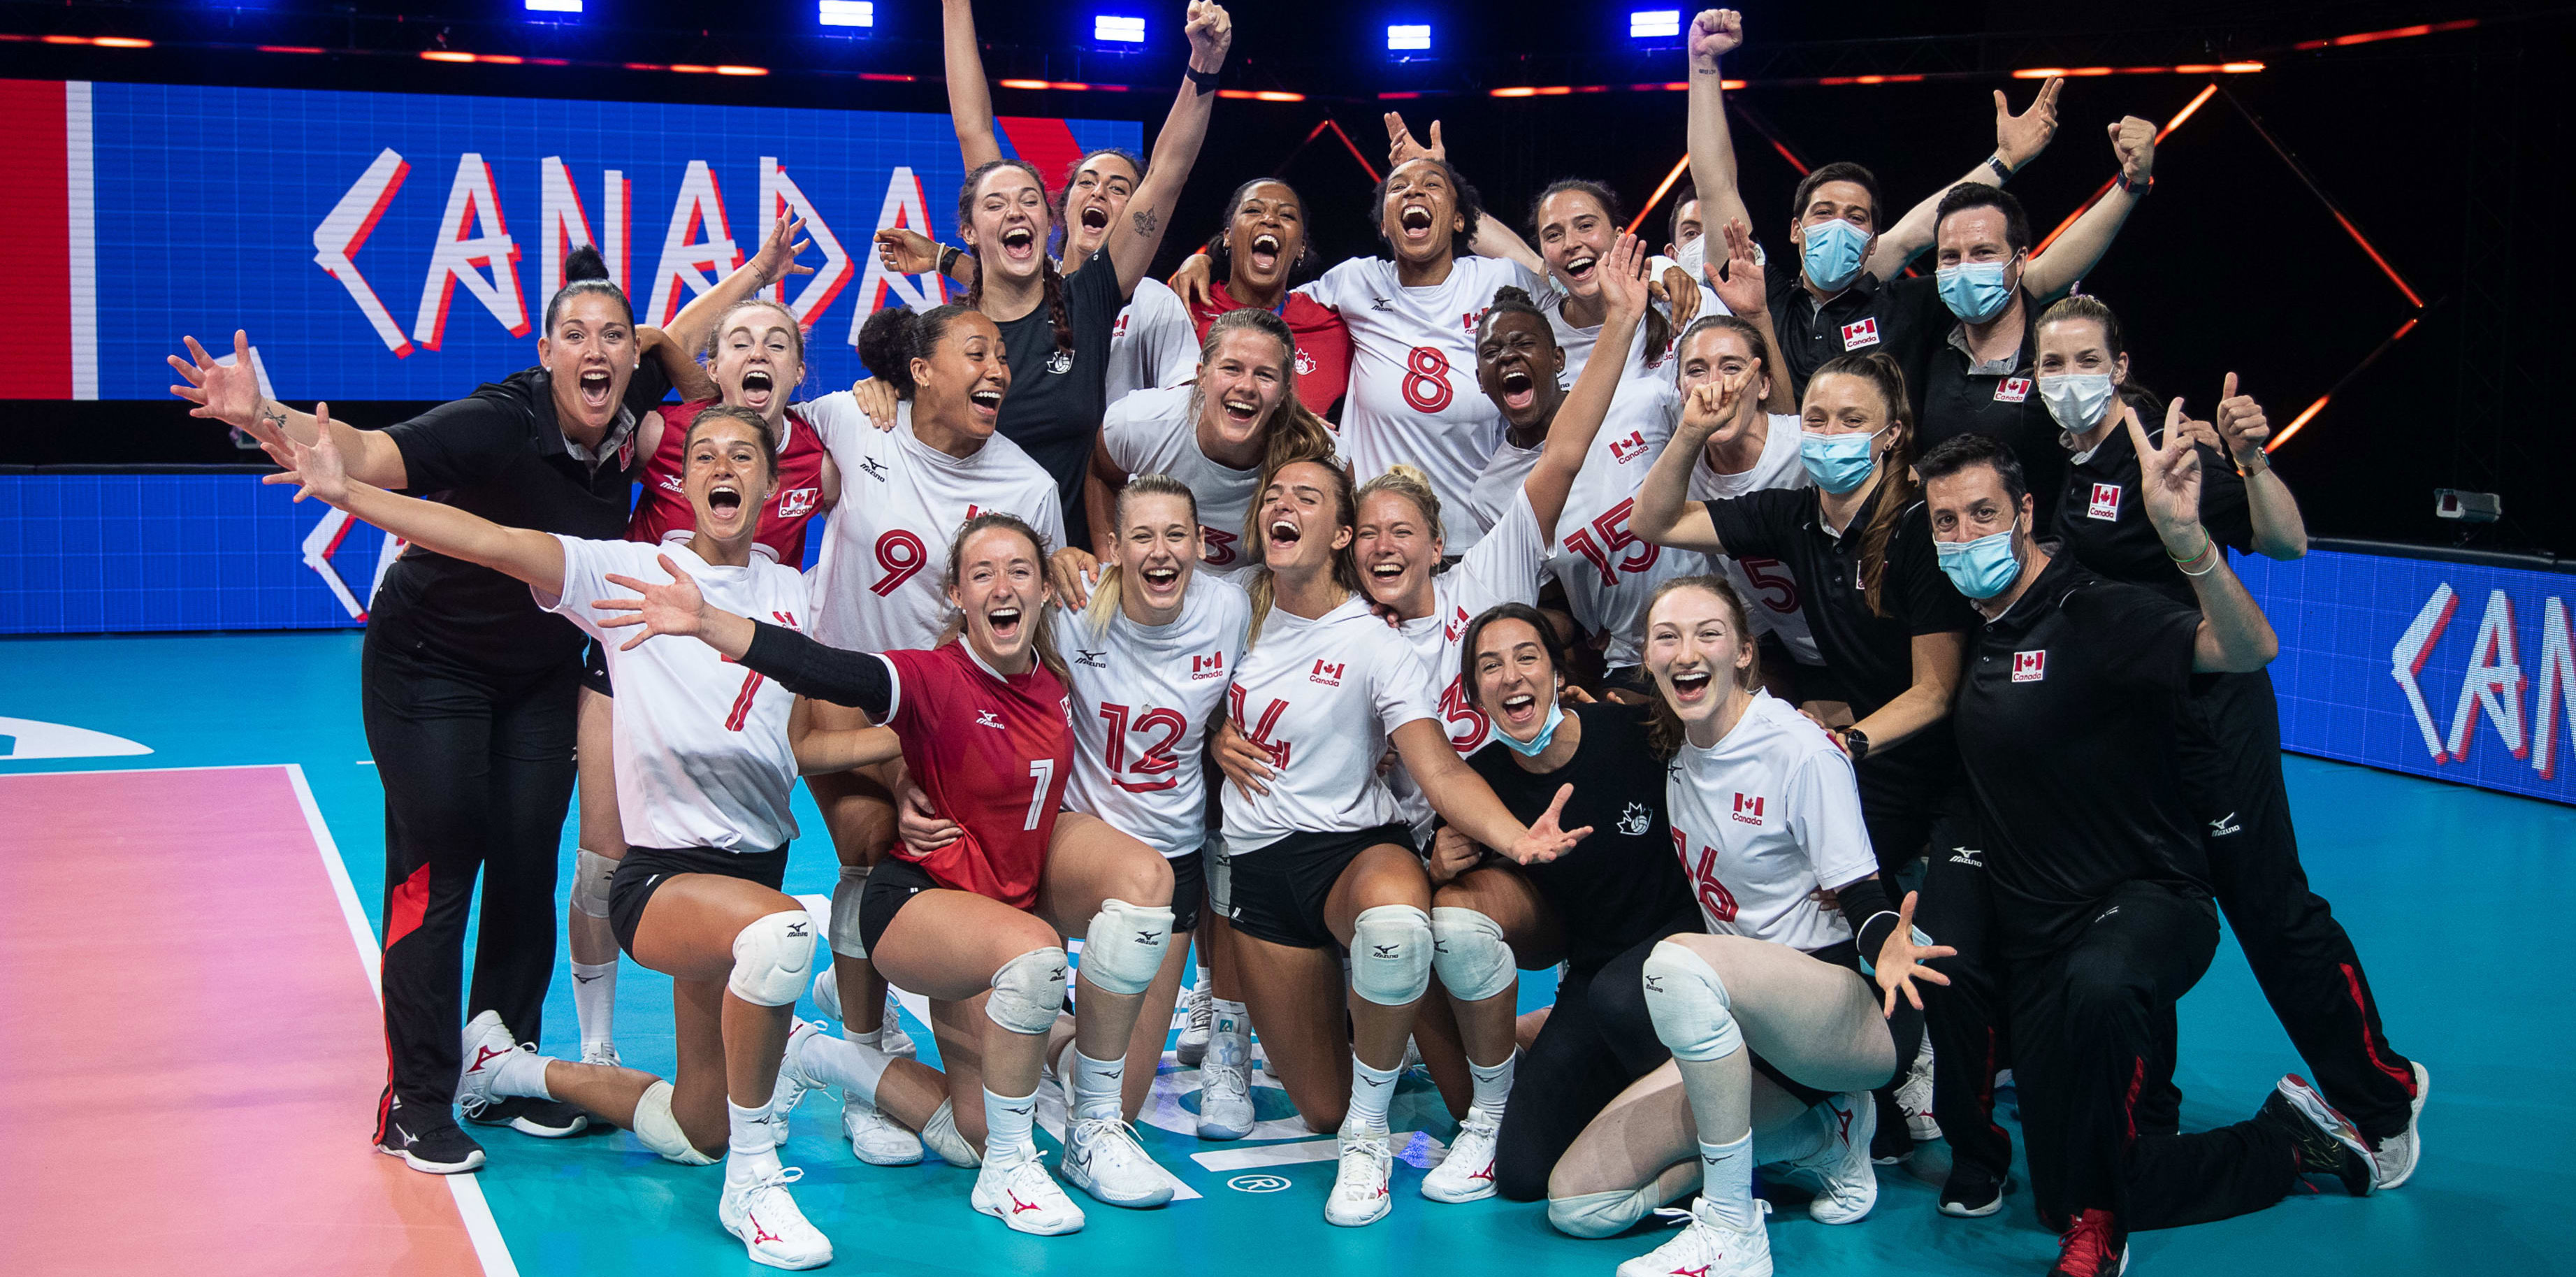 Canada’s women’s team earns first win in VNL Volleyball Canada